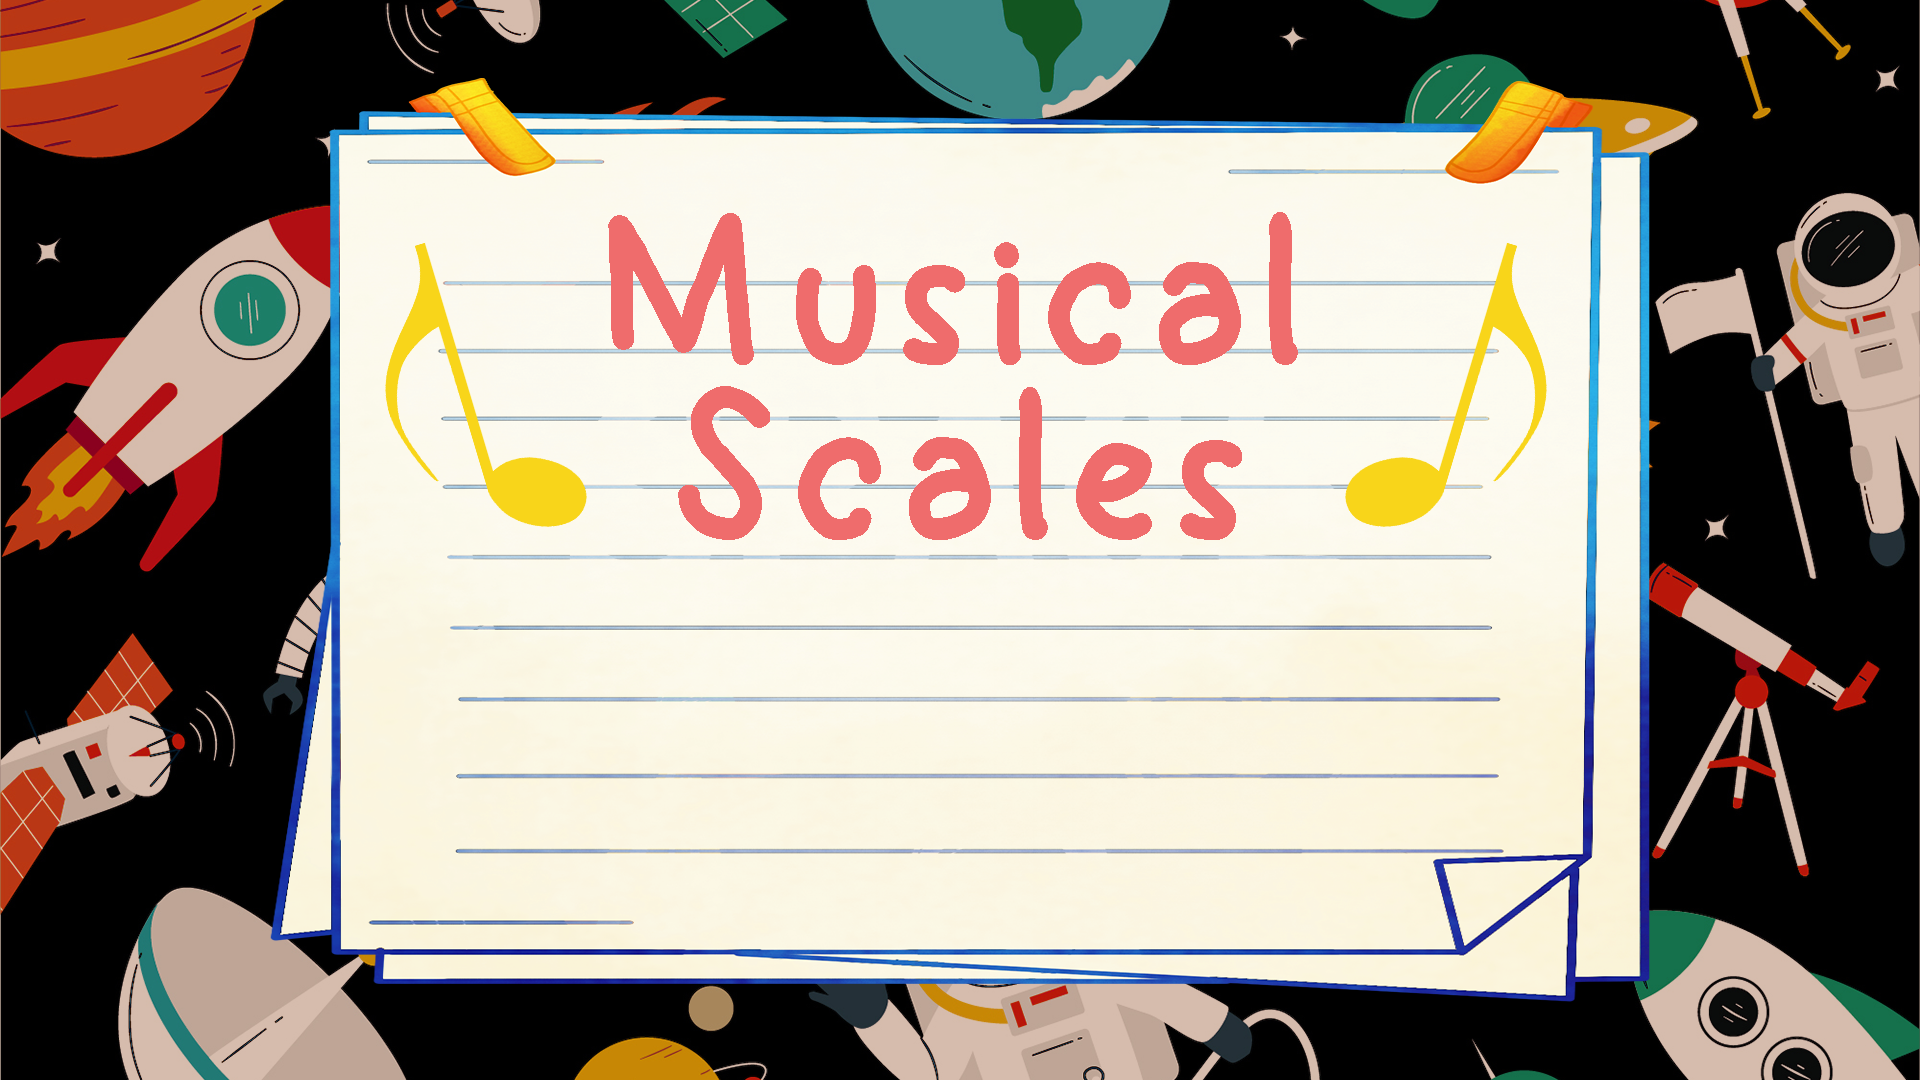 Musical Scales